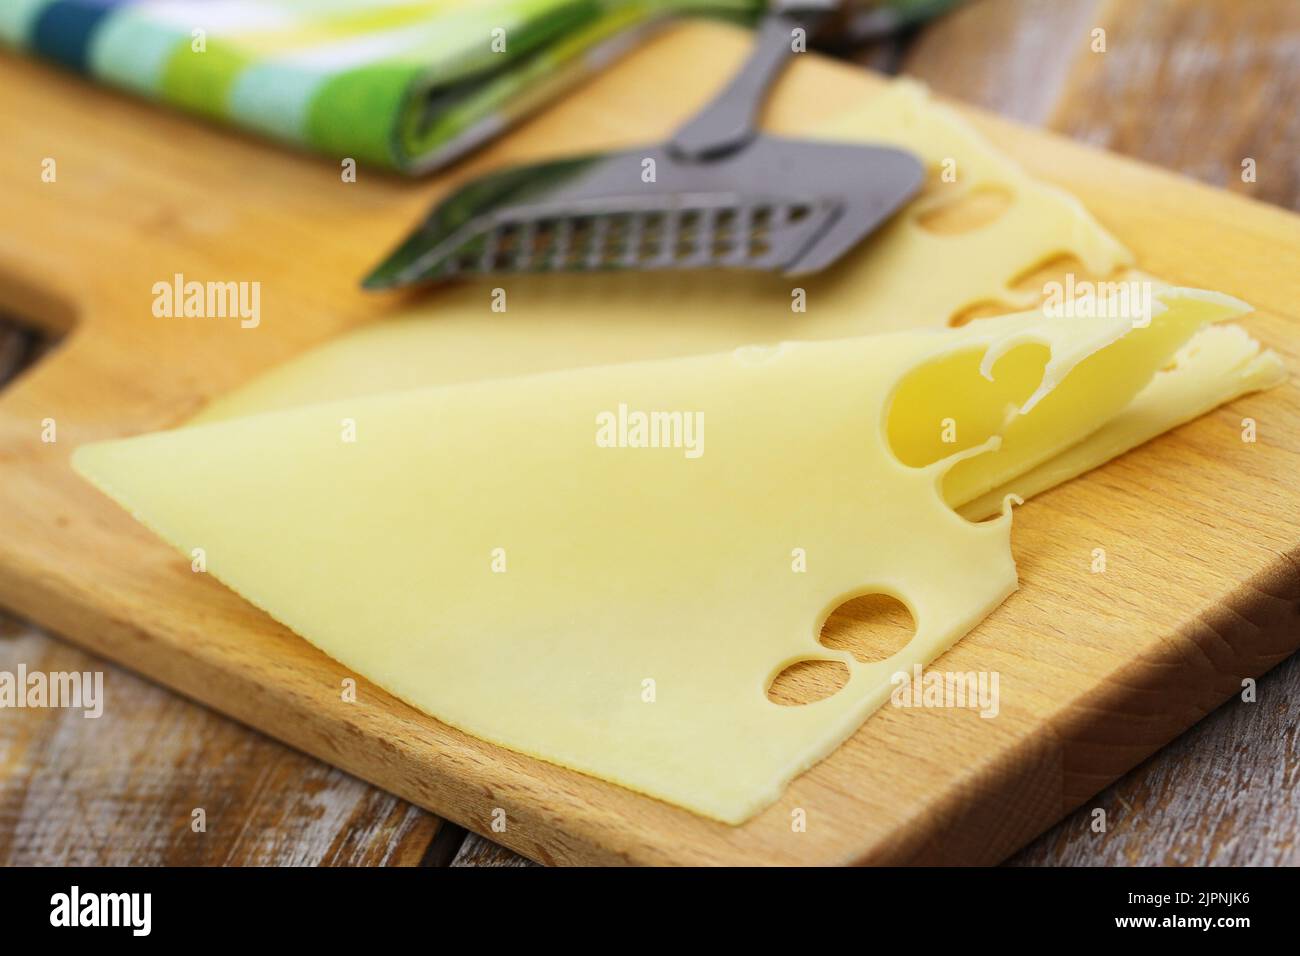 Slice of tasty Swiss cheese on wooden board, closeup Stock Photo